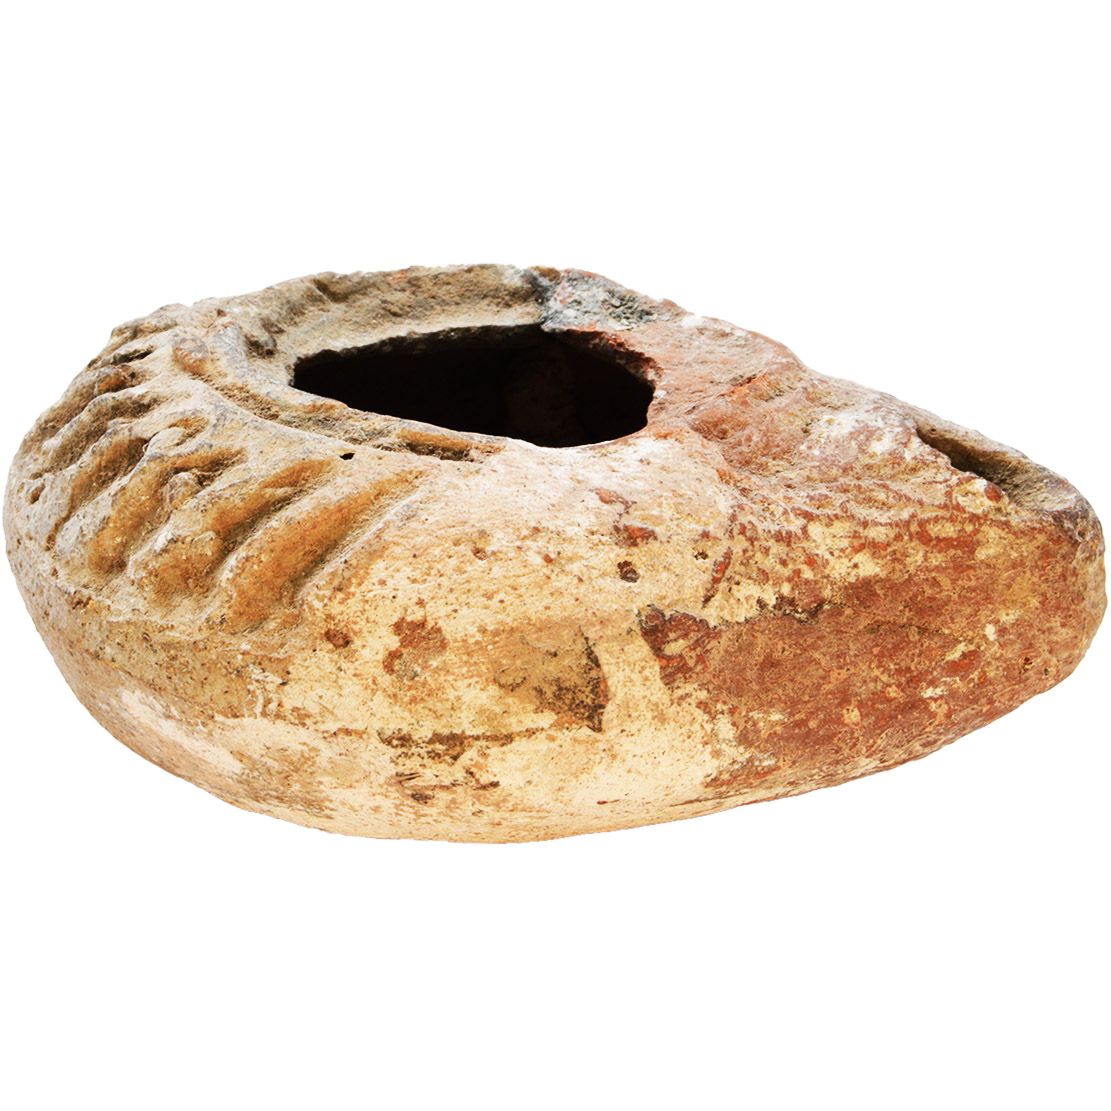 Bare overfyldt ihærdige erklære Roman Clay Oil Lamp - Ancient Potery from Israel